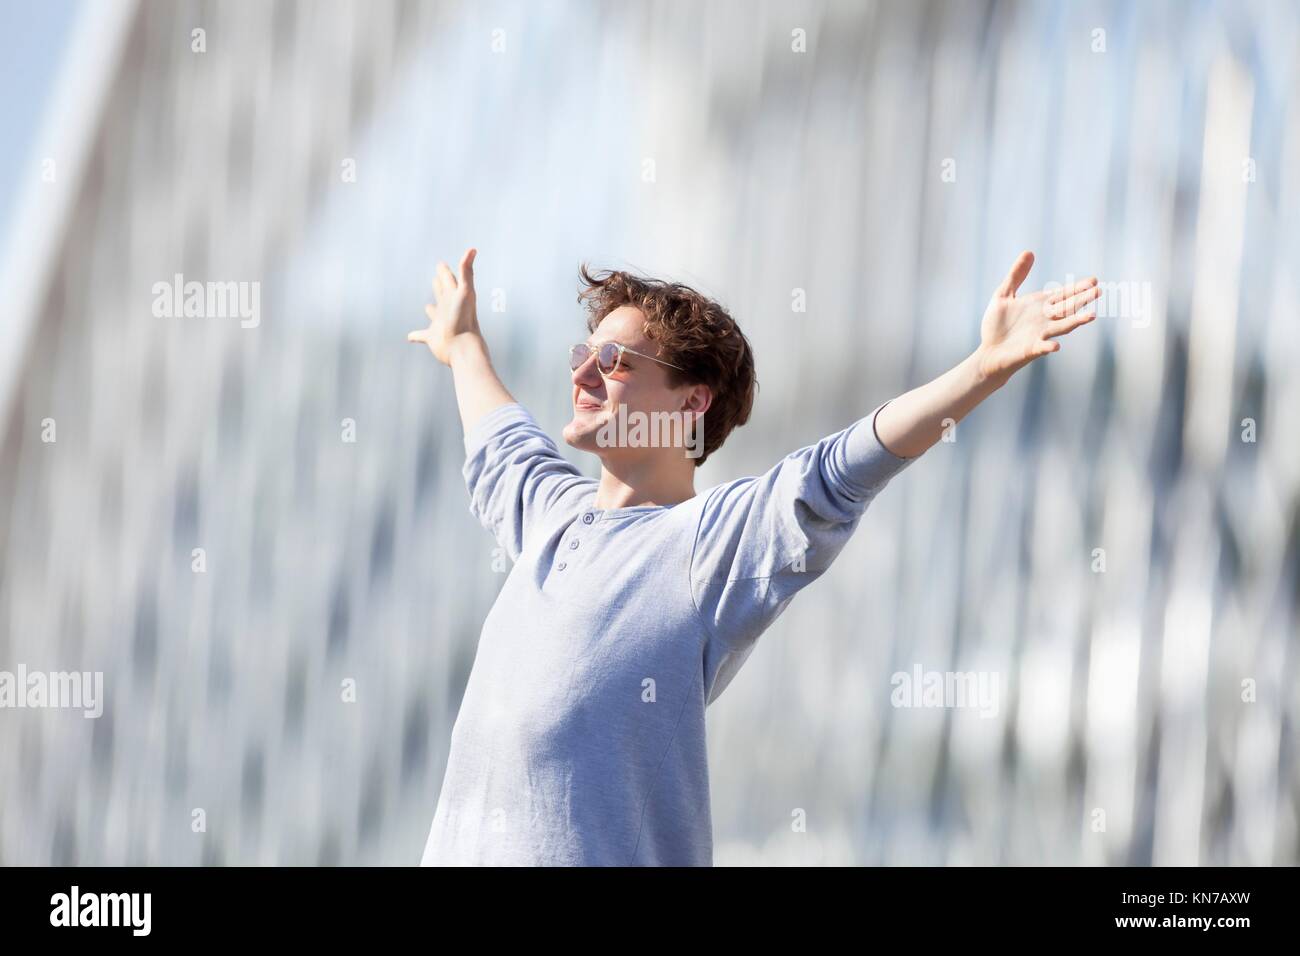 Excited Young Man Stretching out his Arm in Emotion Outdoors. Stock Photo